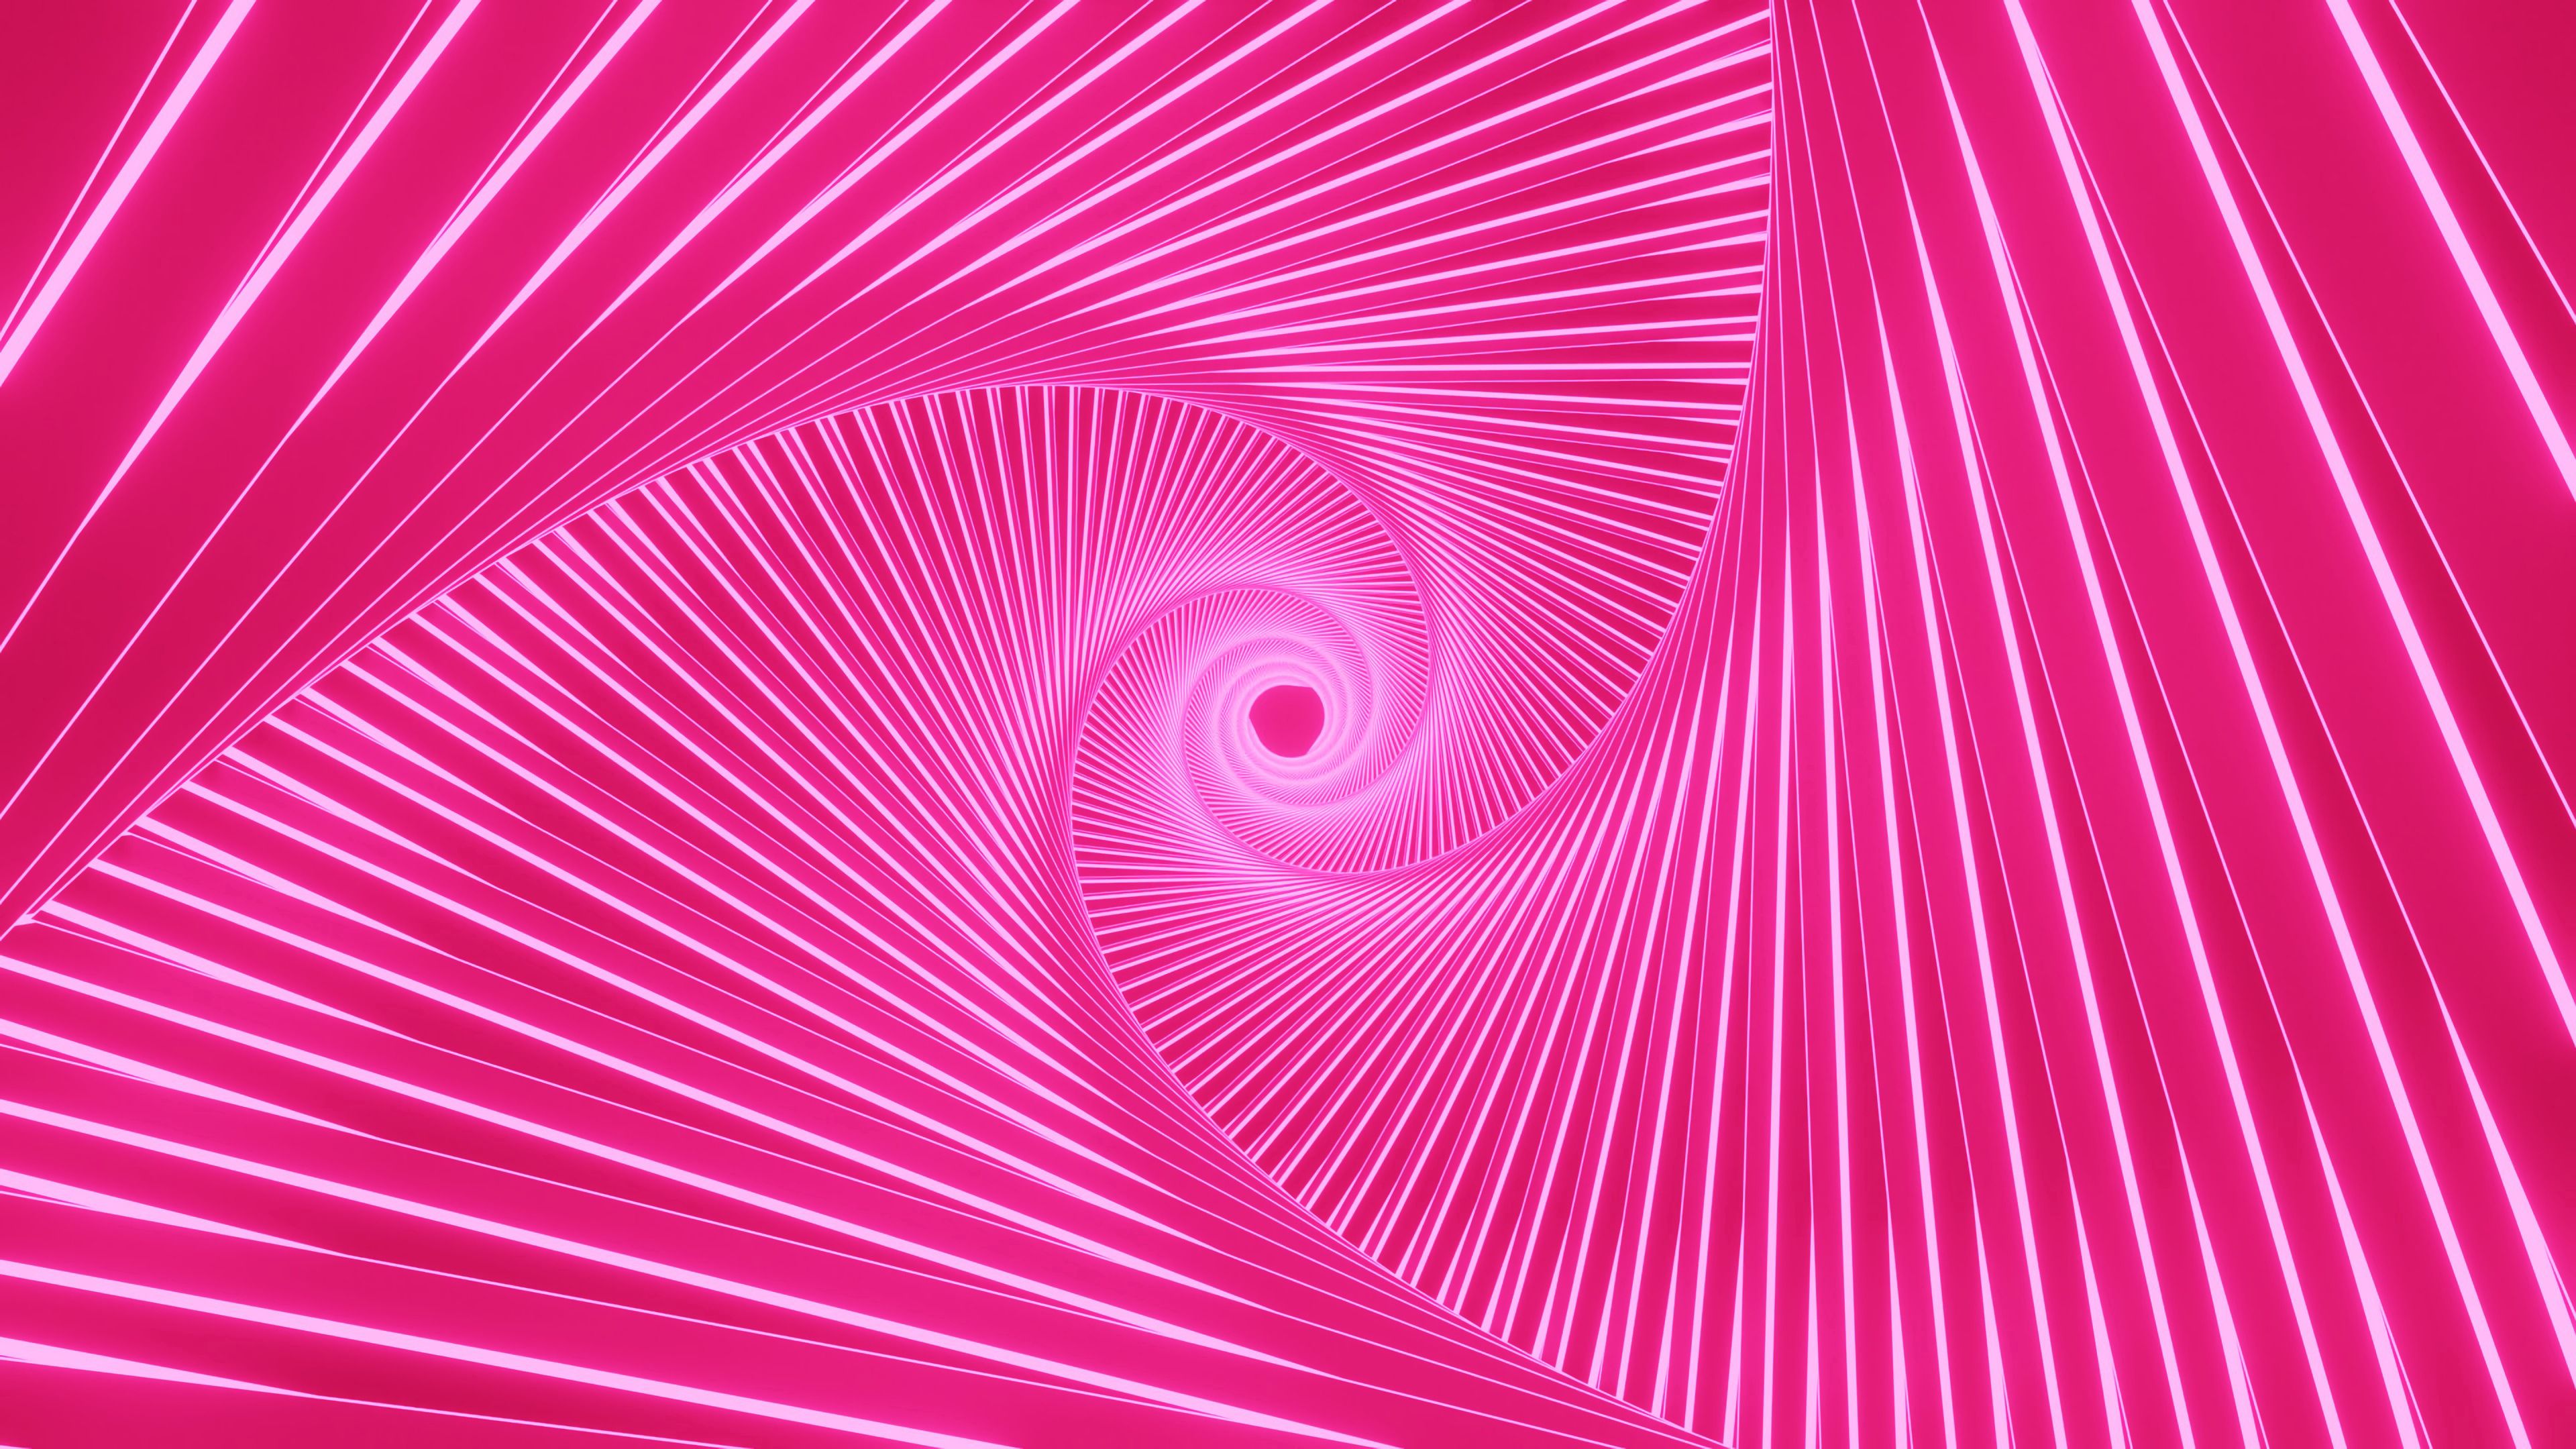 pink, abstract, bright, glow, funnel, swirling, involute QHD